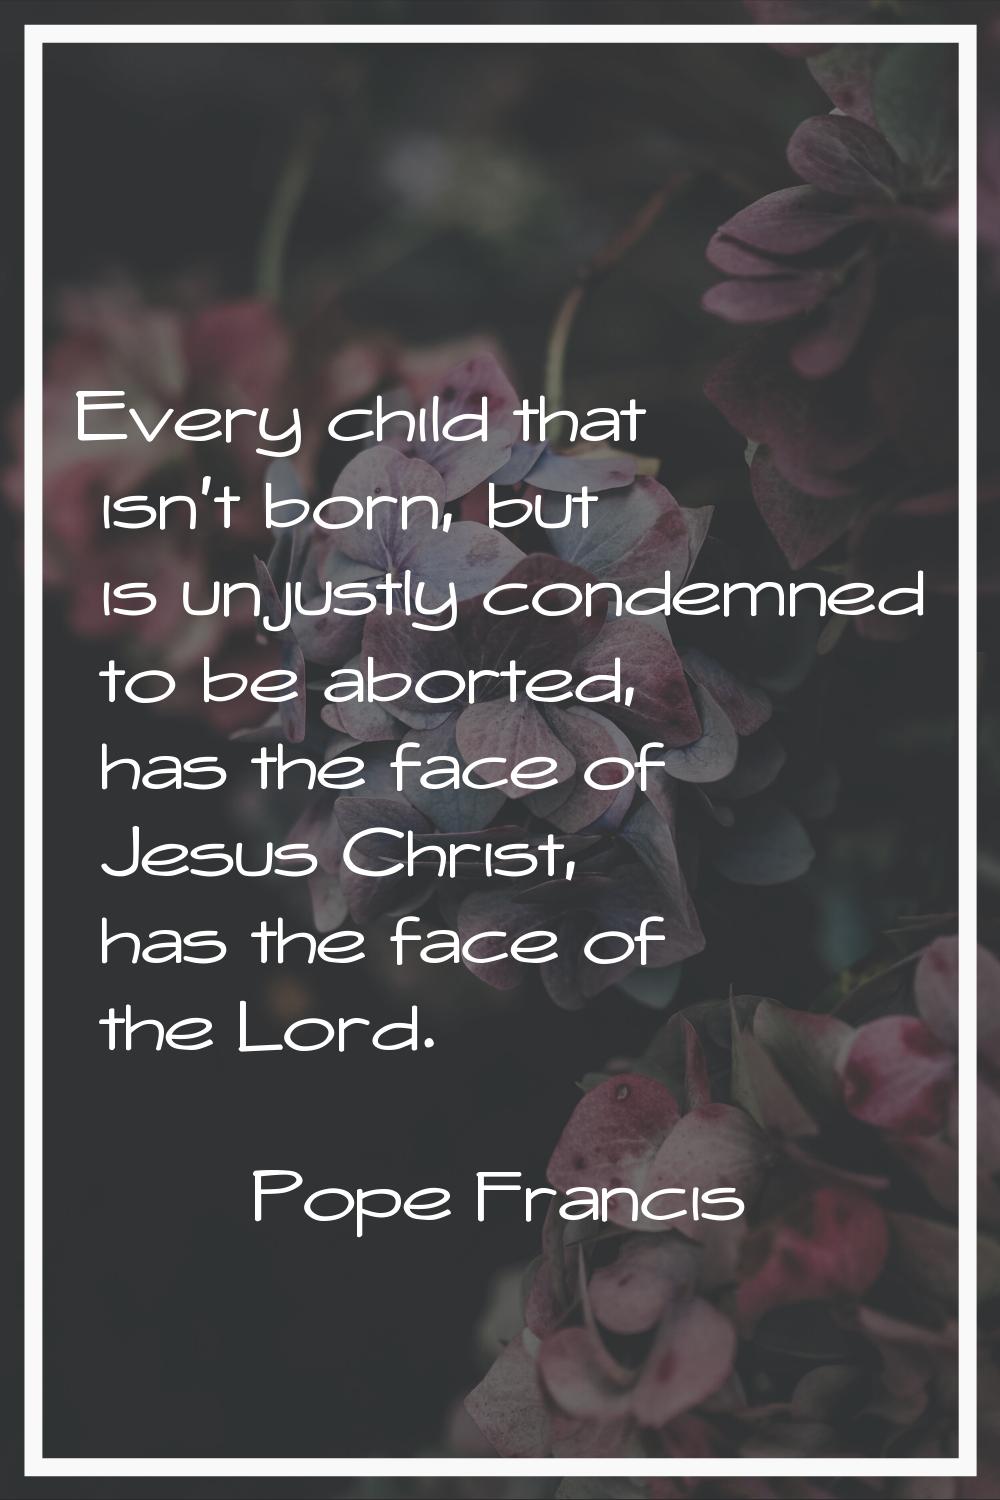 Every child that isn't born, but is unjustly condemned to be aborted, has the face of Jesus Christ,